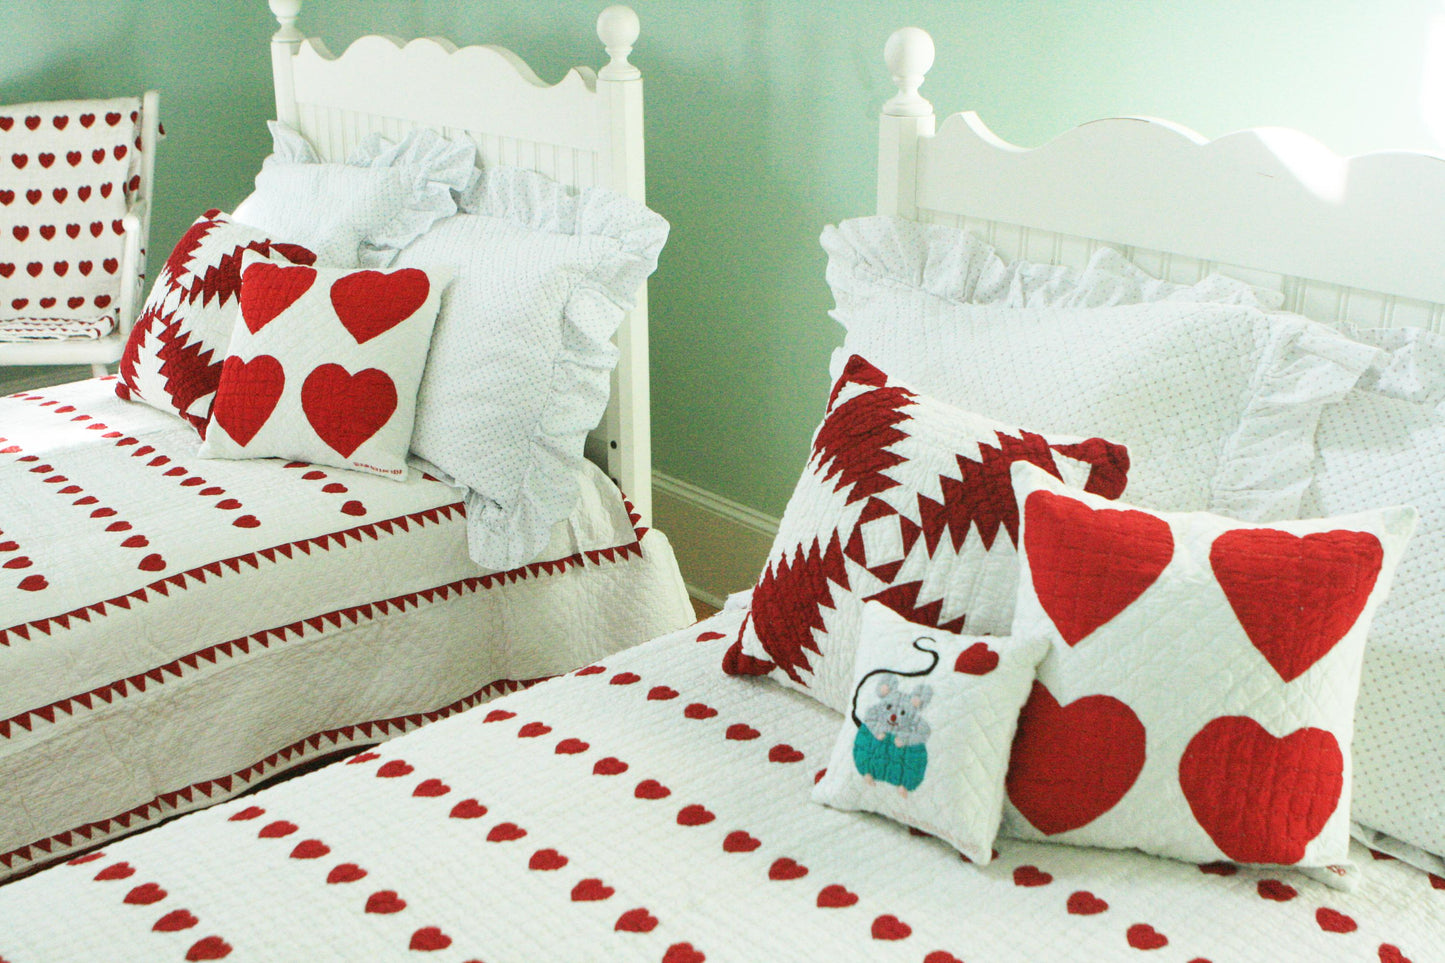 "Mini Red Hearts" in White-Red Twin Quilt 64" x 85"